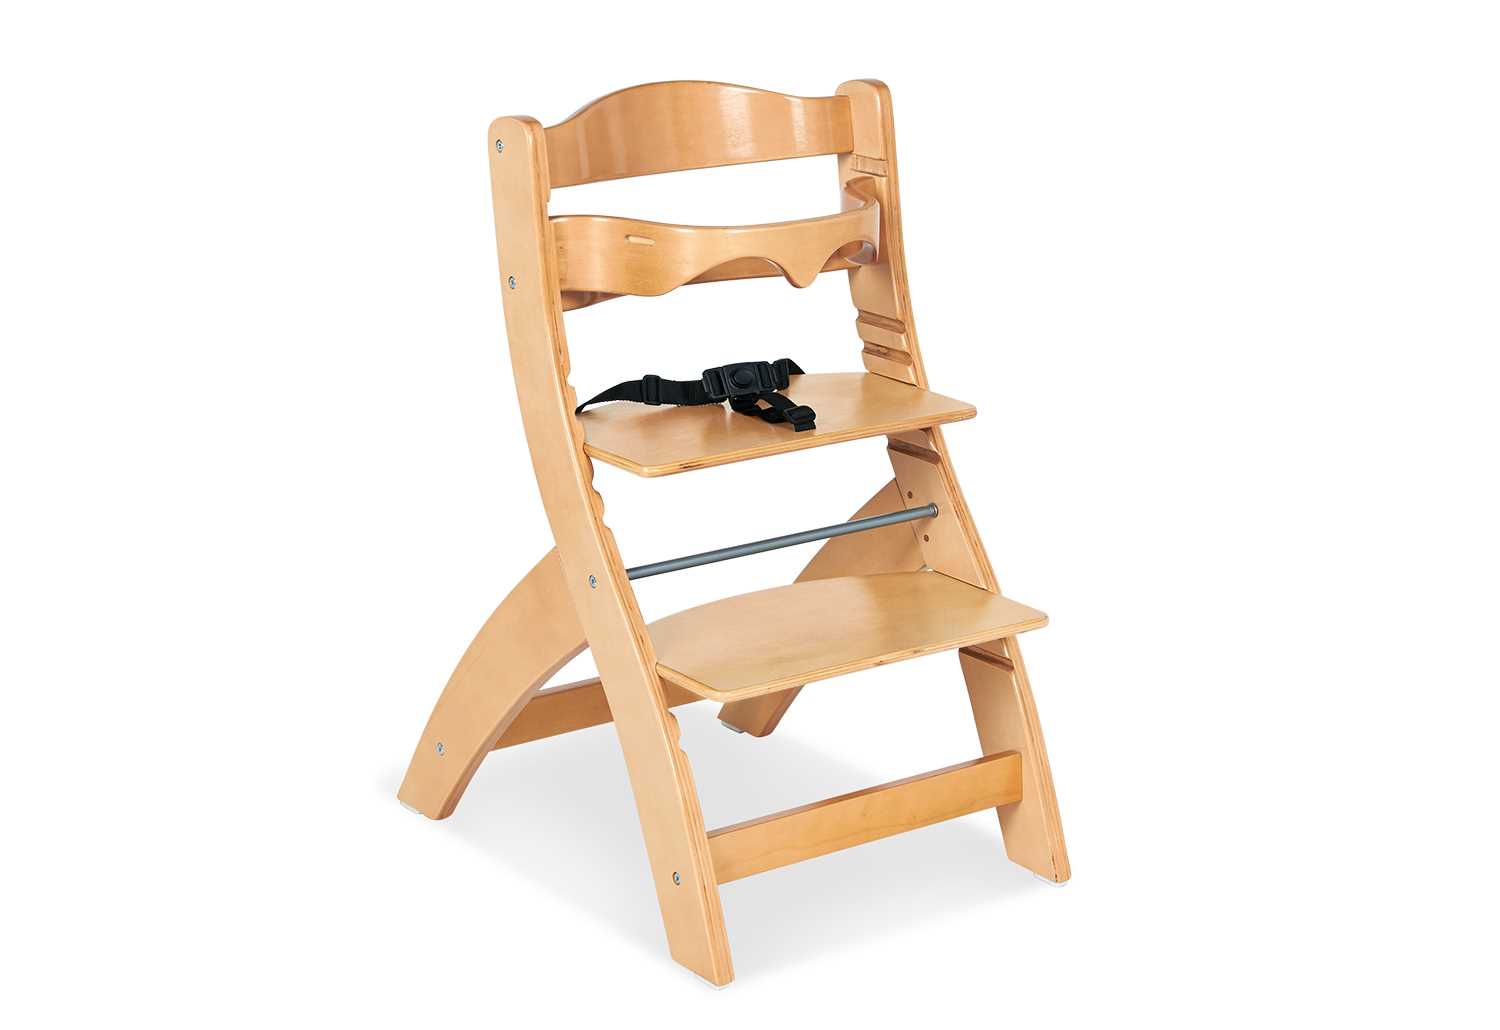 Pinolino Højstol - - ApS Bouncers Thilo, for Baby Kids Import Poppel/Natur and Highchairs